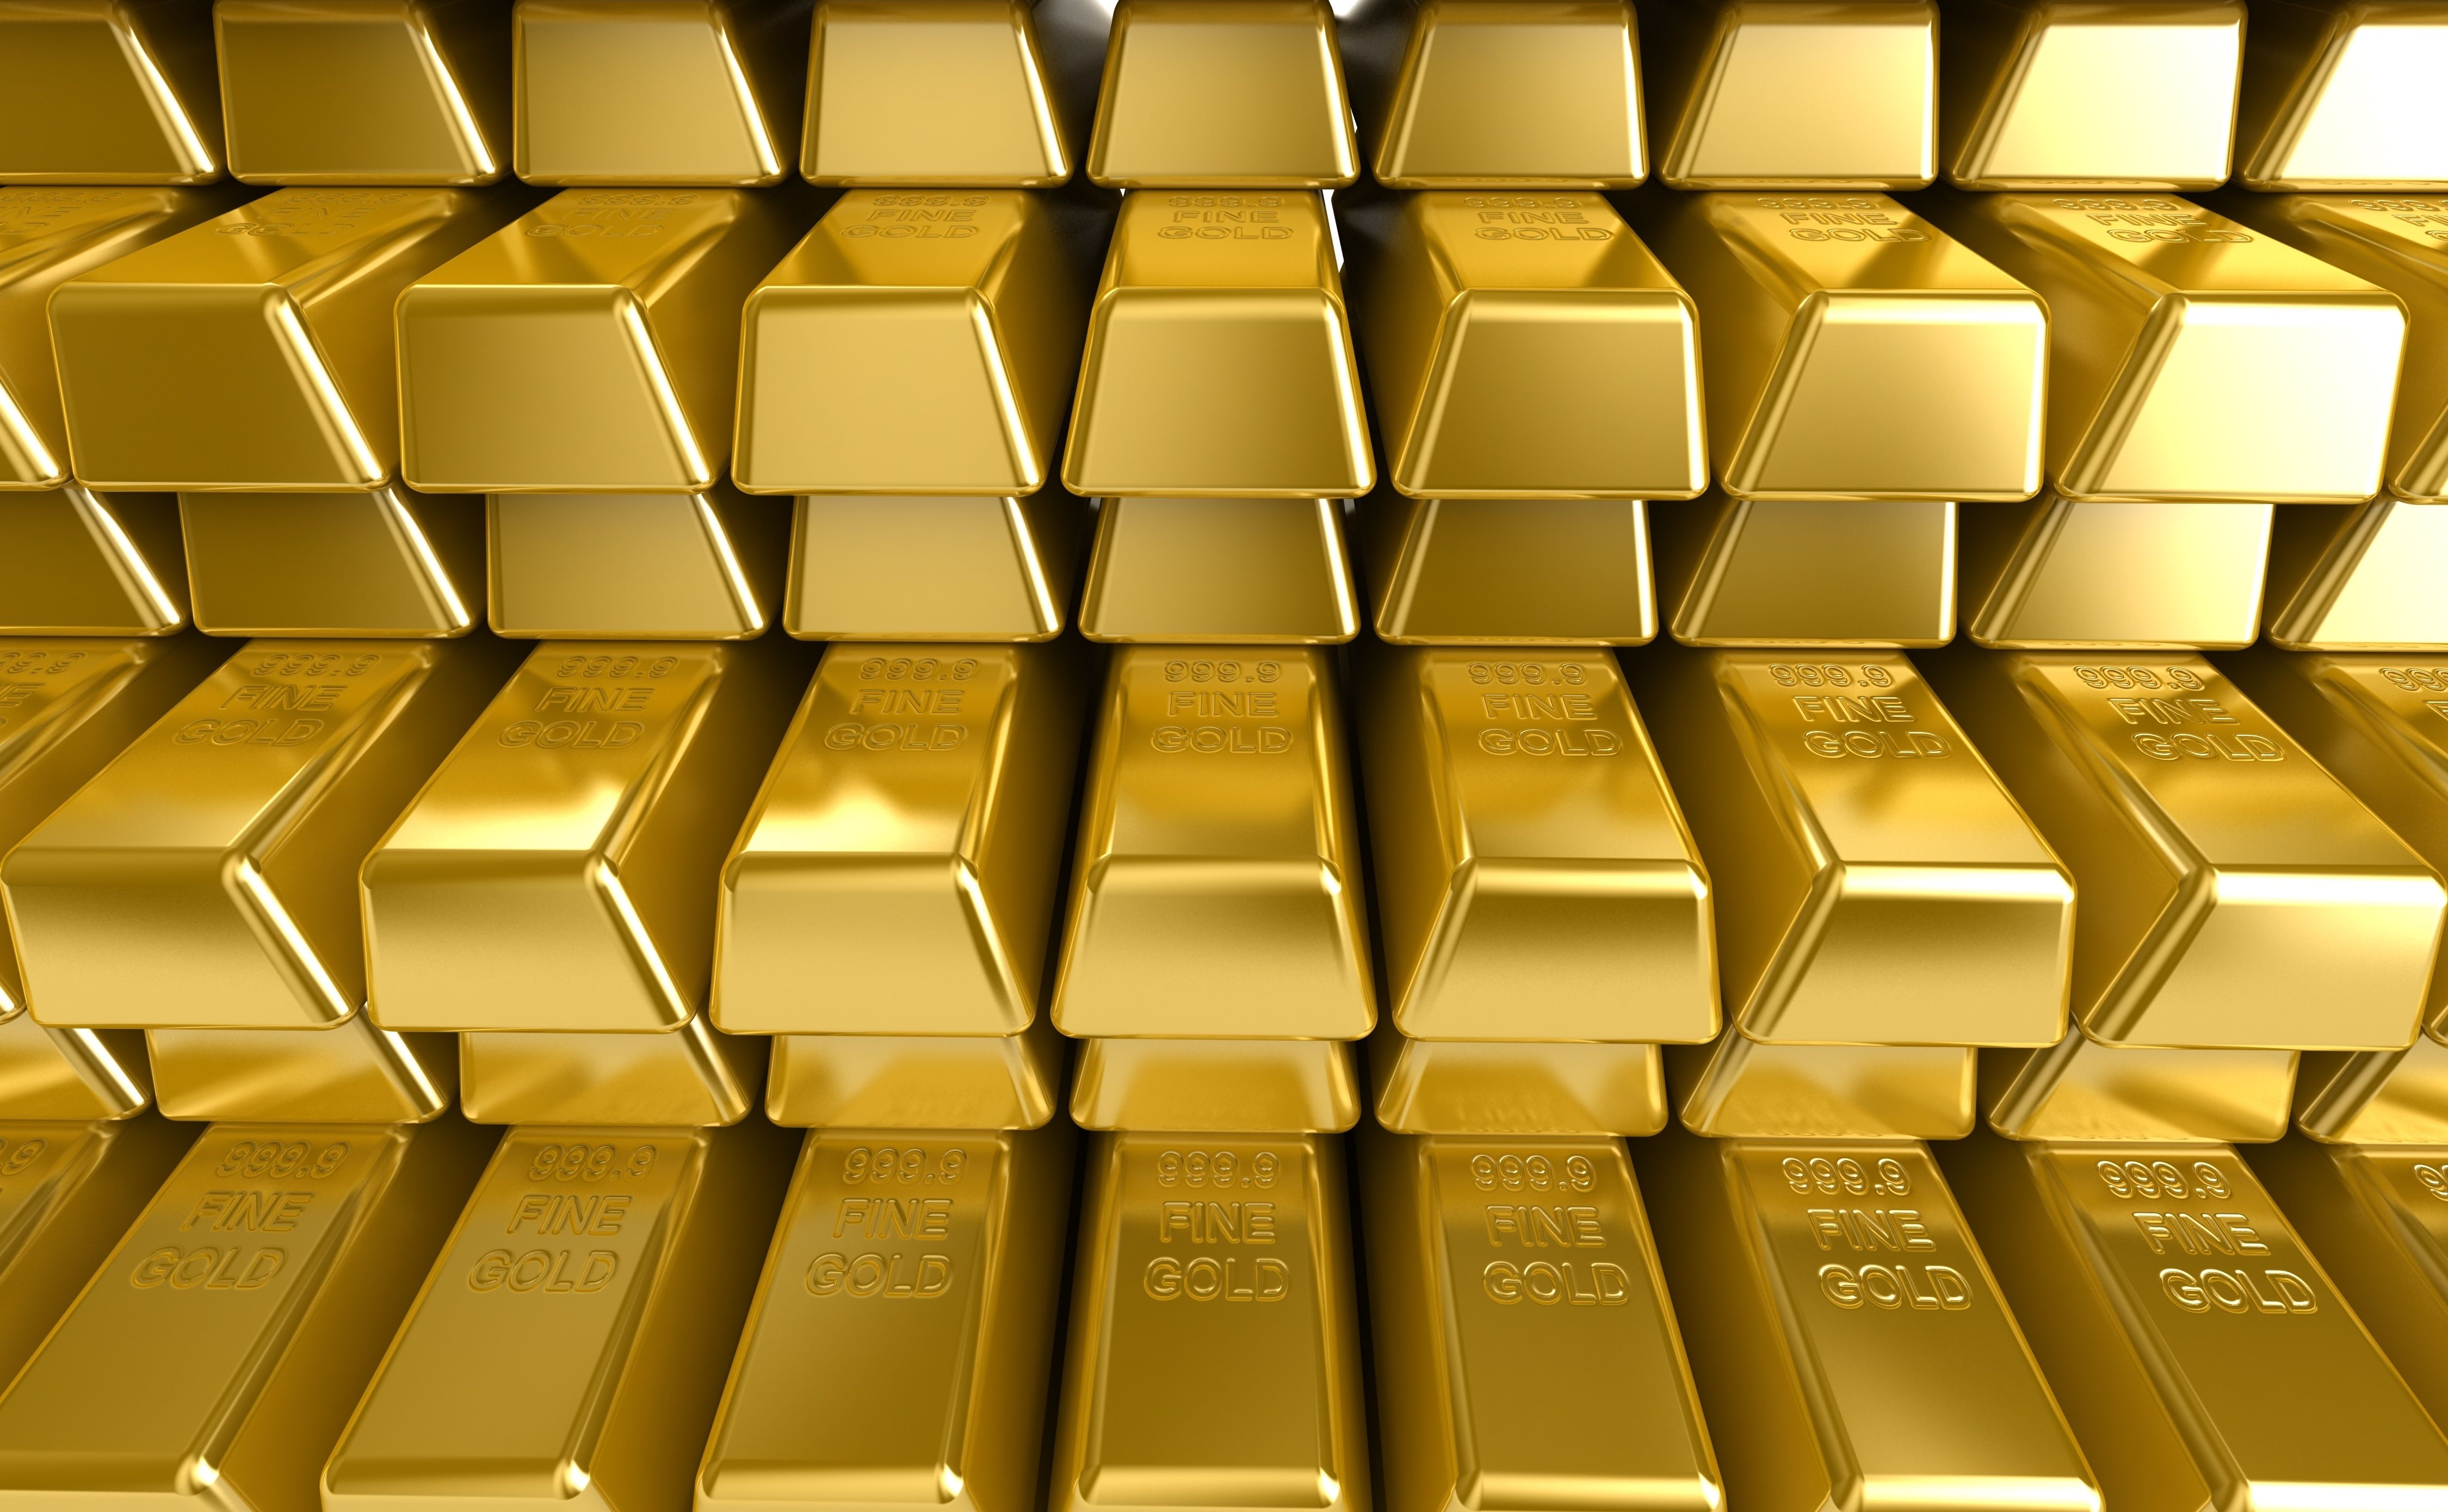 Pure Gold IPhone Wallpaper HD - IPhone Wallpapers : iPhone Wallpapers in  2023 | Gold wallpaper iphone, Gold wallpaper hd, Iphone wallpaper